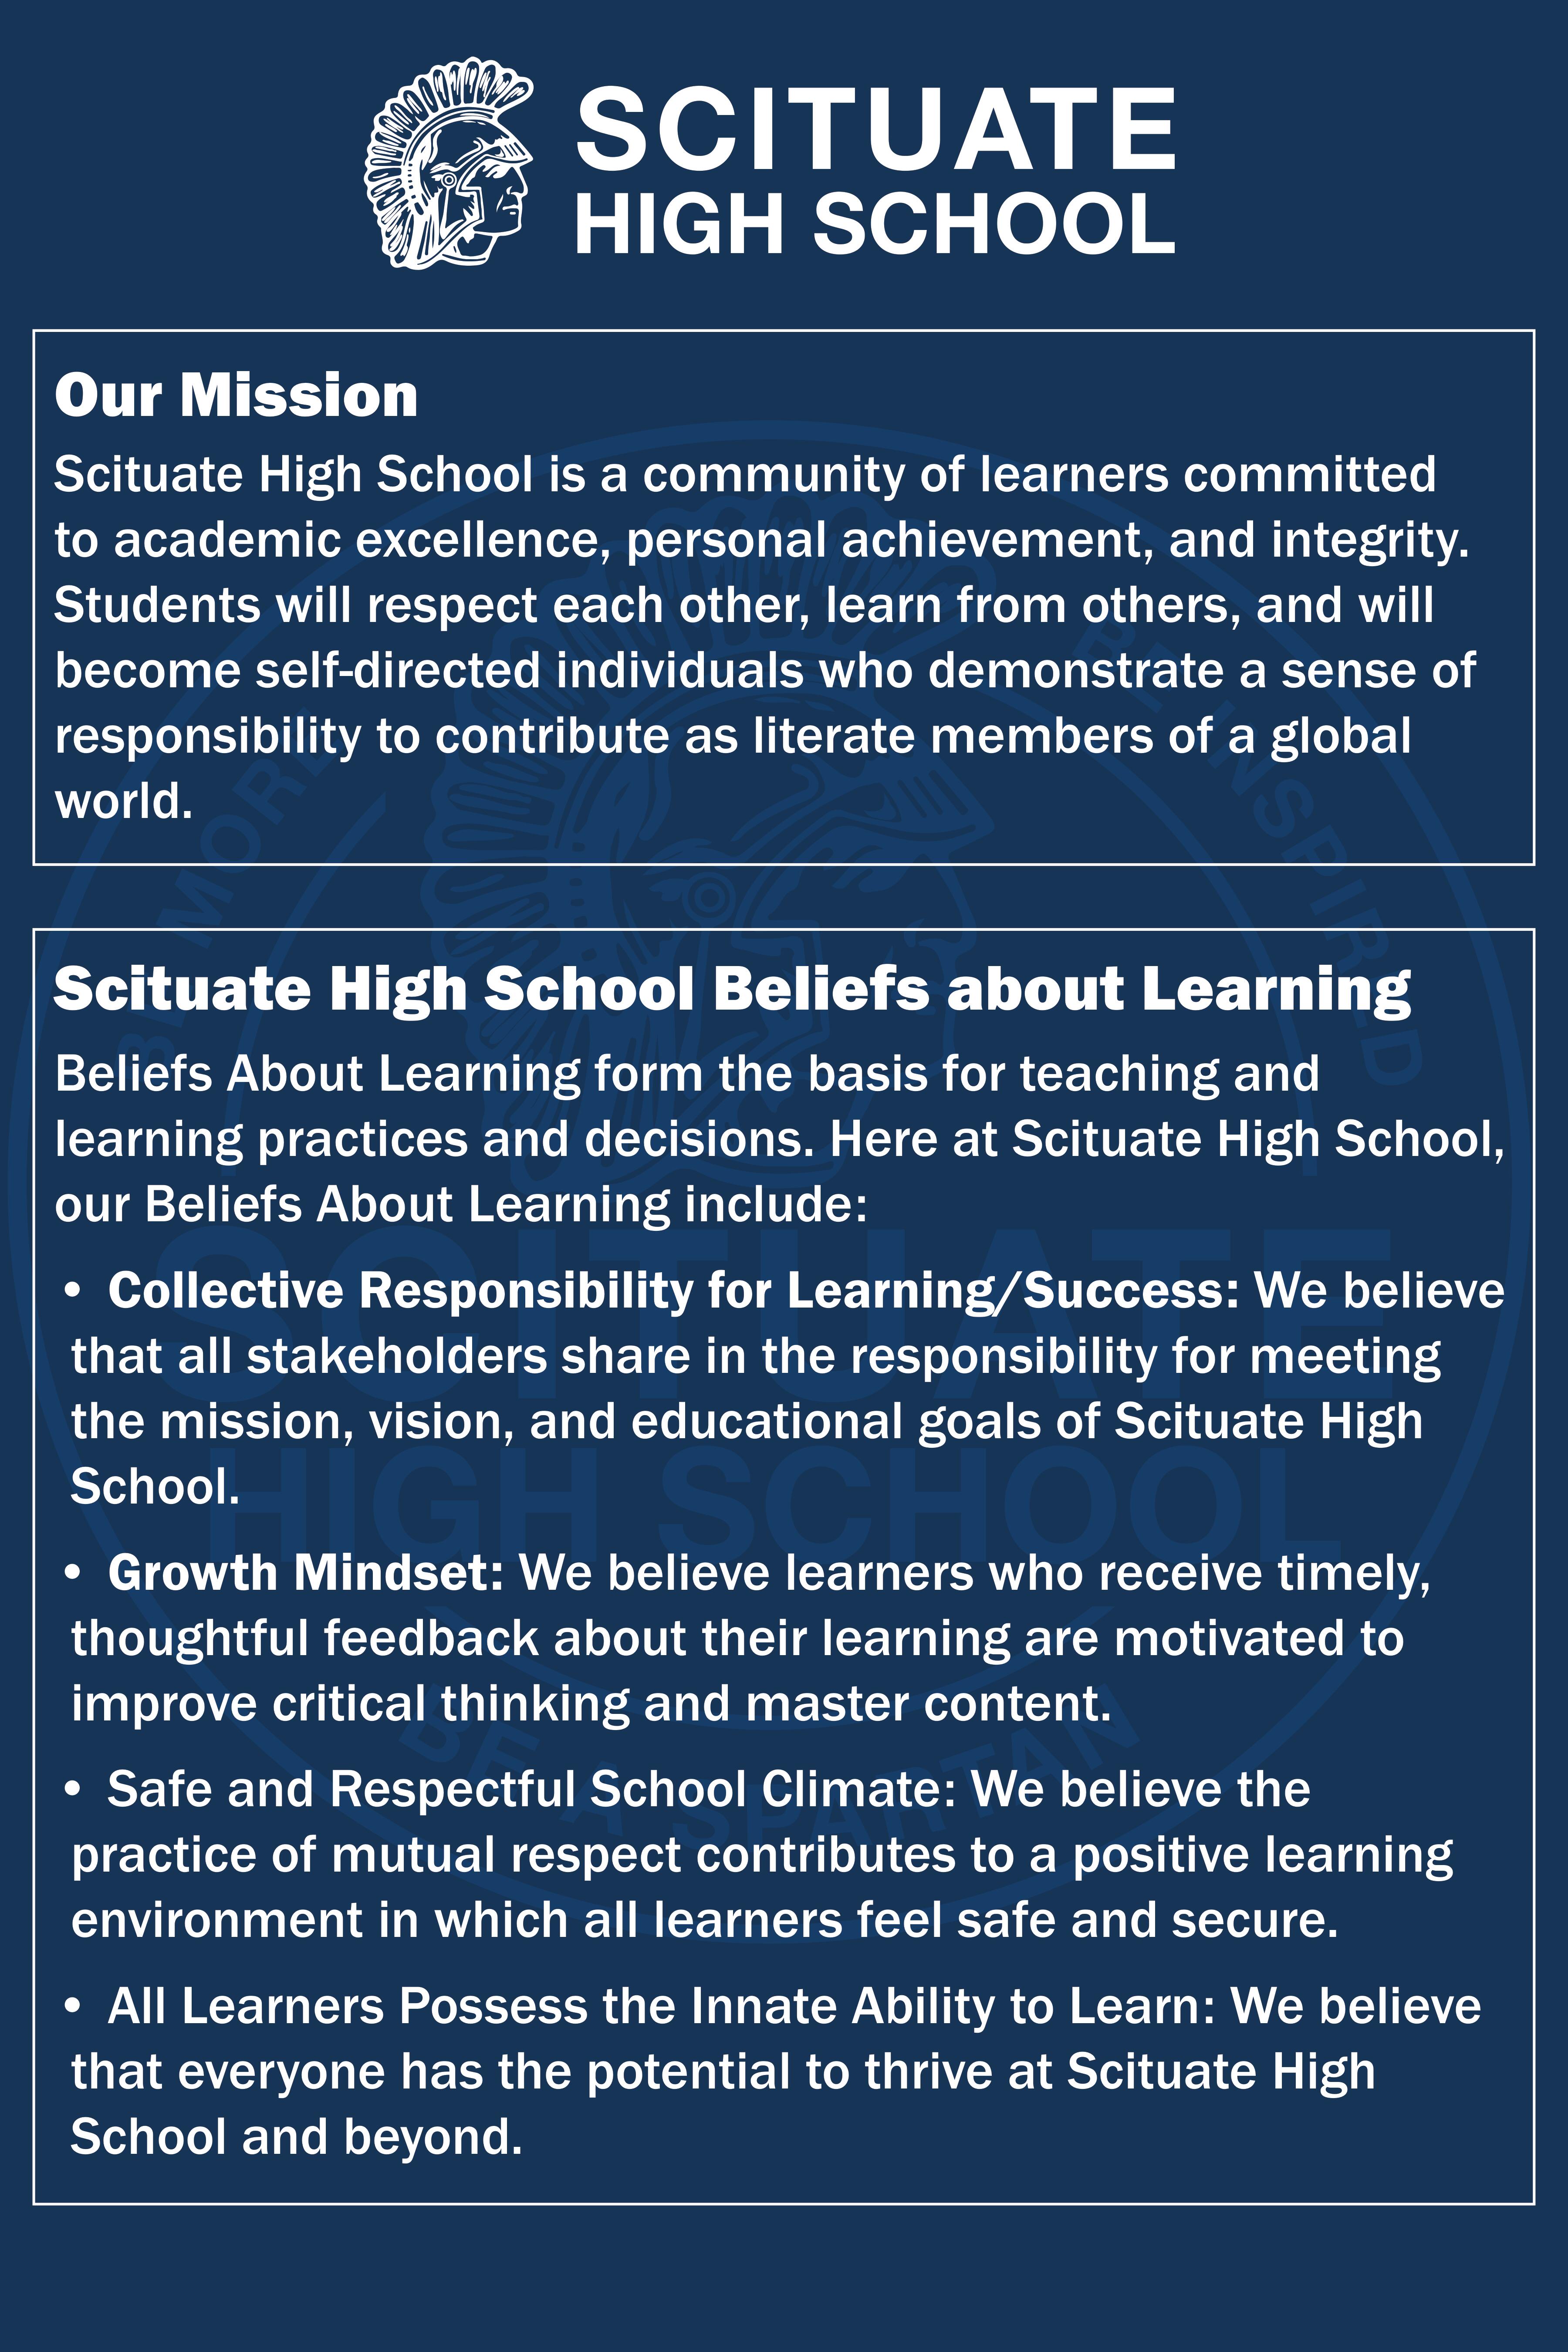 SHS Mission and Beliefs statements